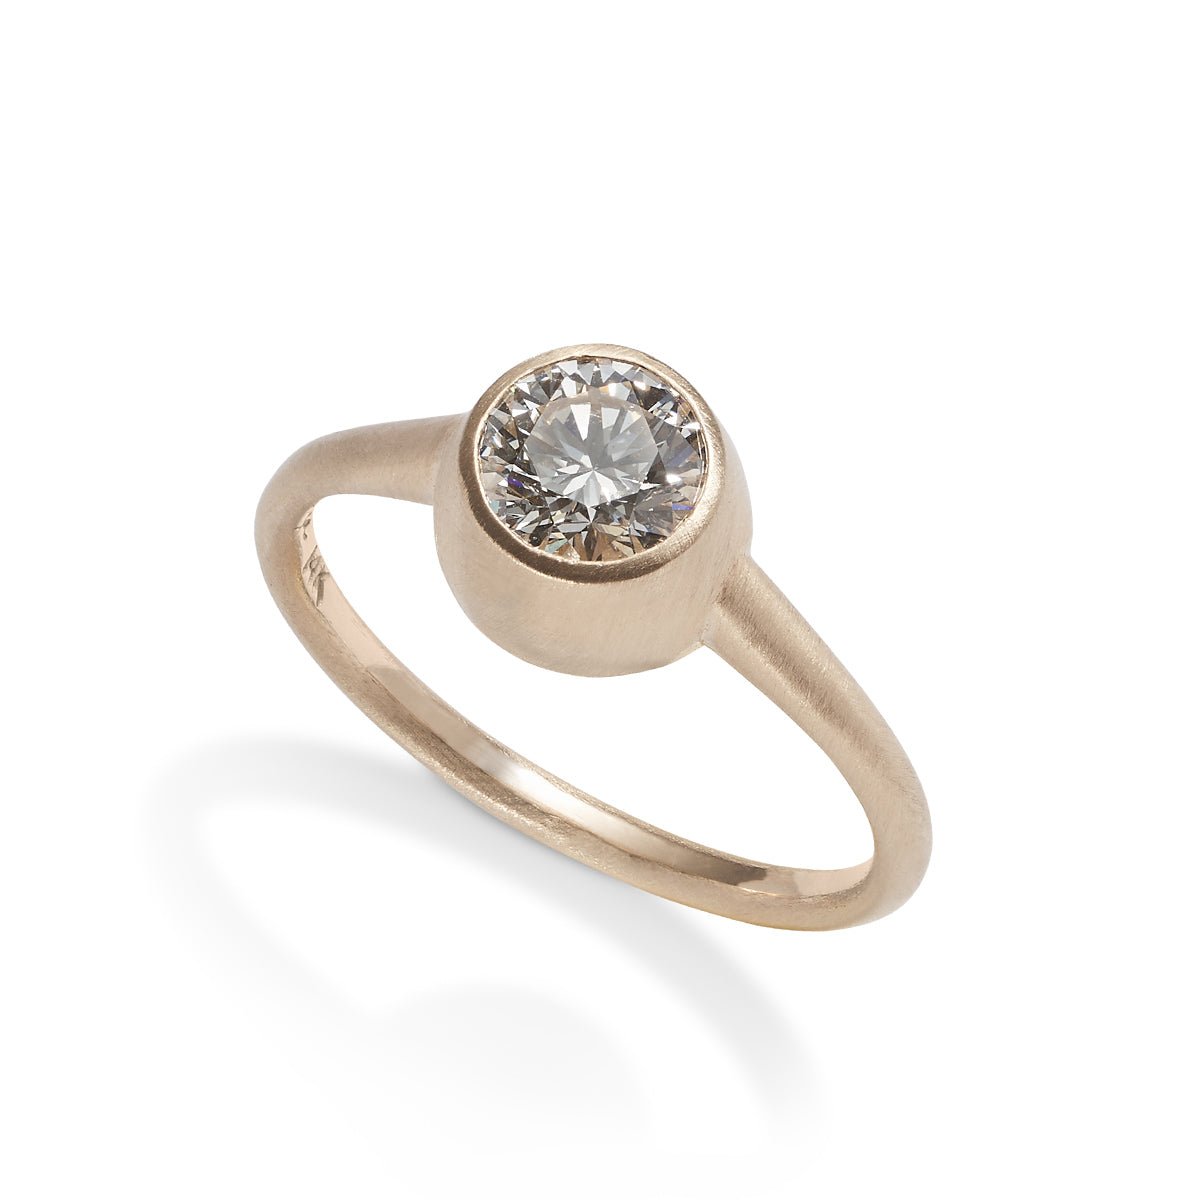 Modern statement Salire ring from Betsy & Iya. Features a round brilliant-cut lab-grown diamond (0.7 ct) and 14K gold. Designed and handcrafted in our Portland, Oregon studio.